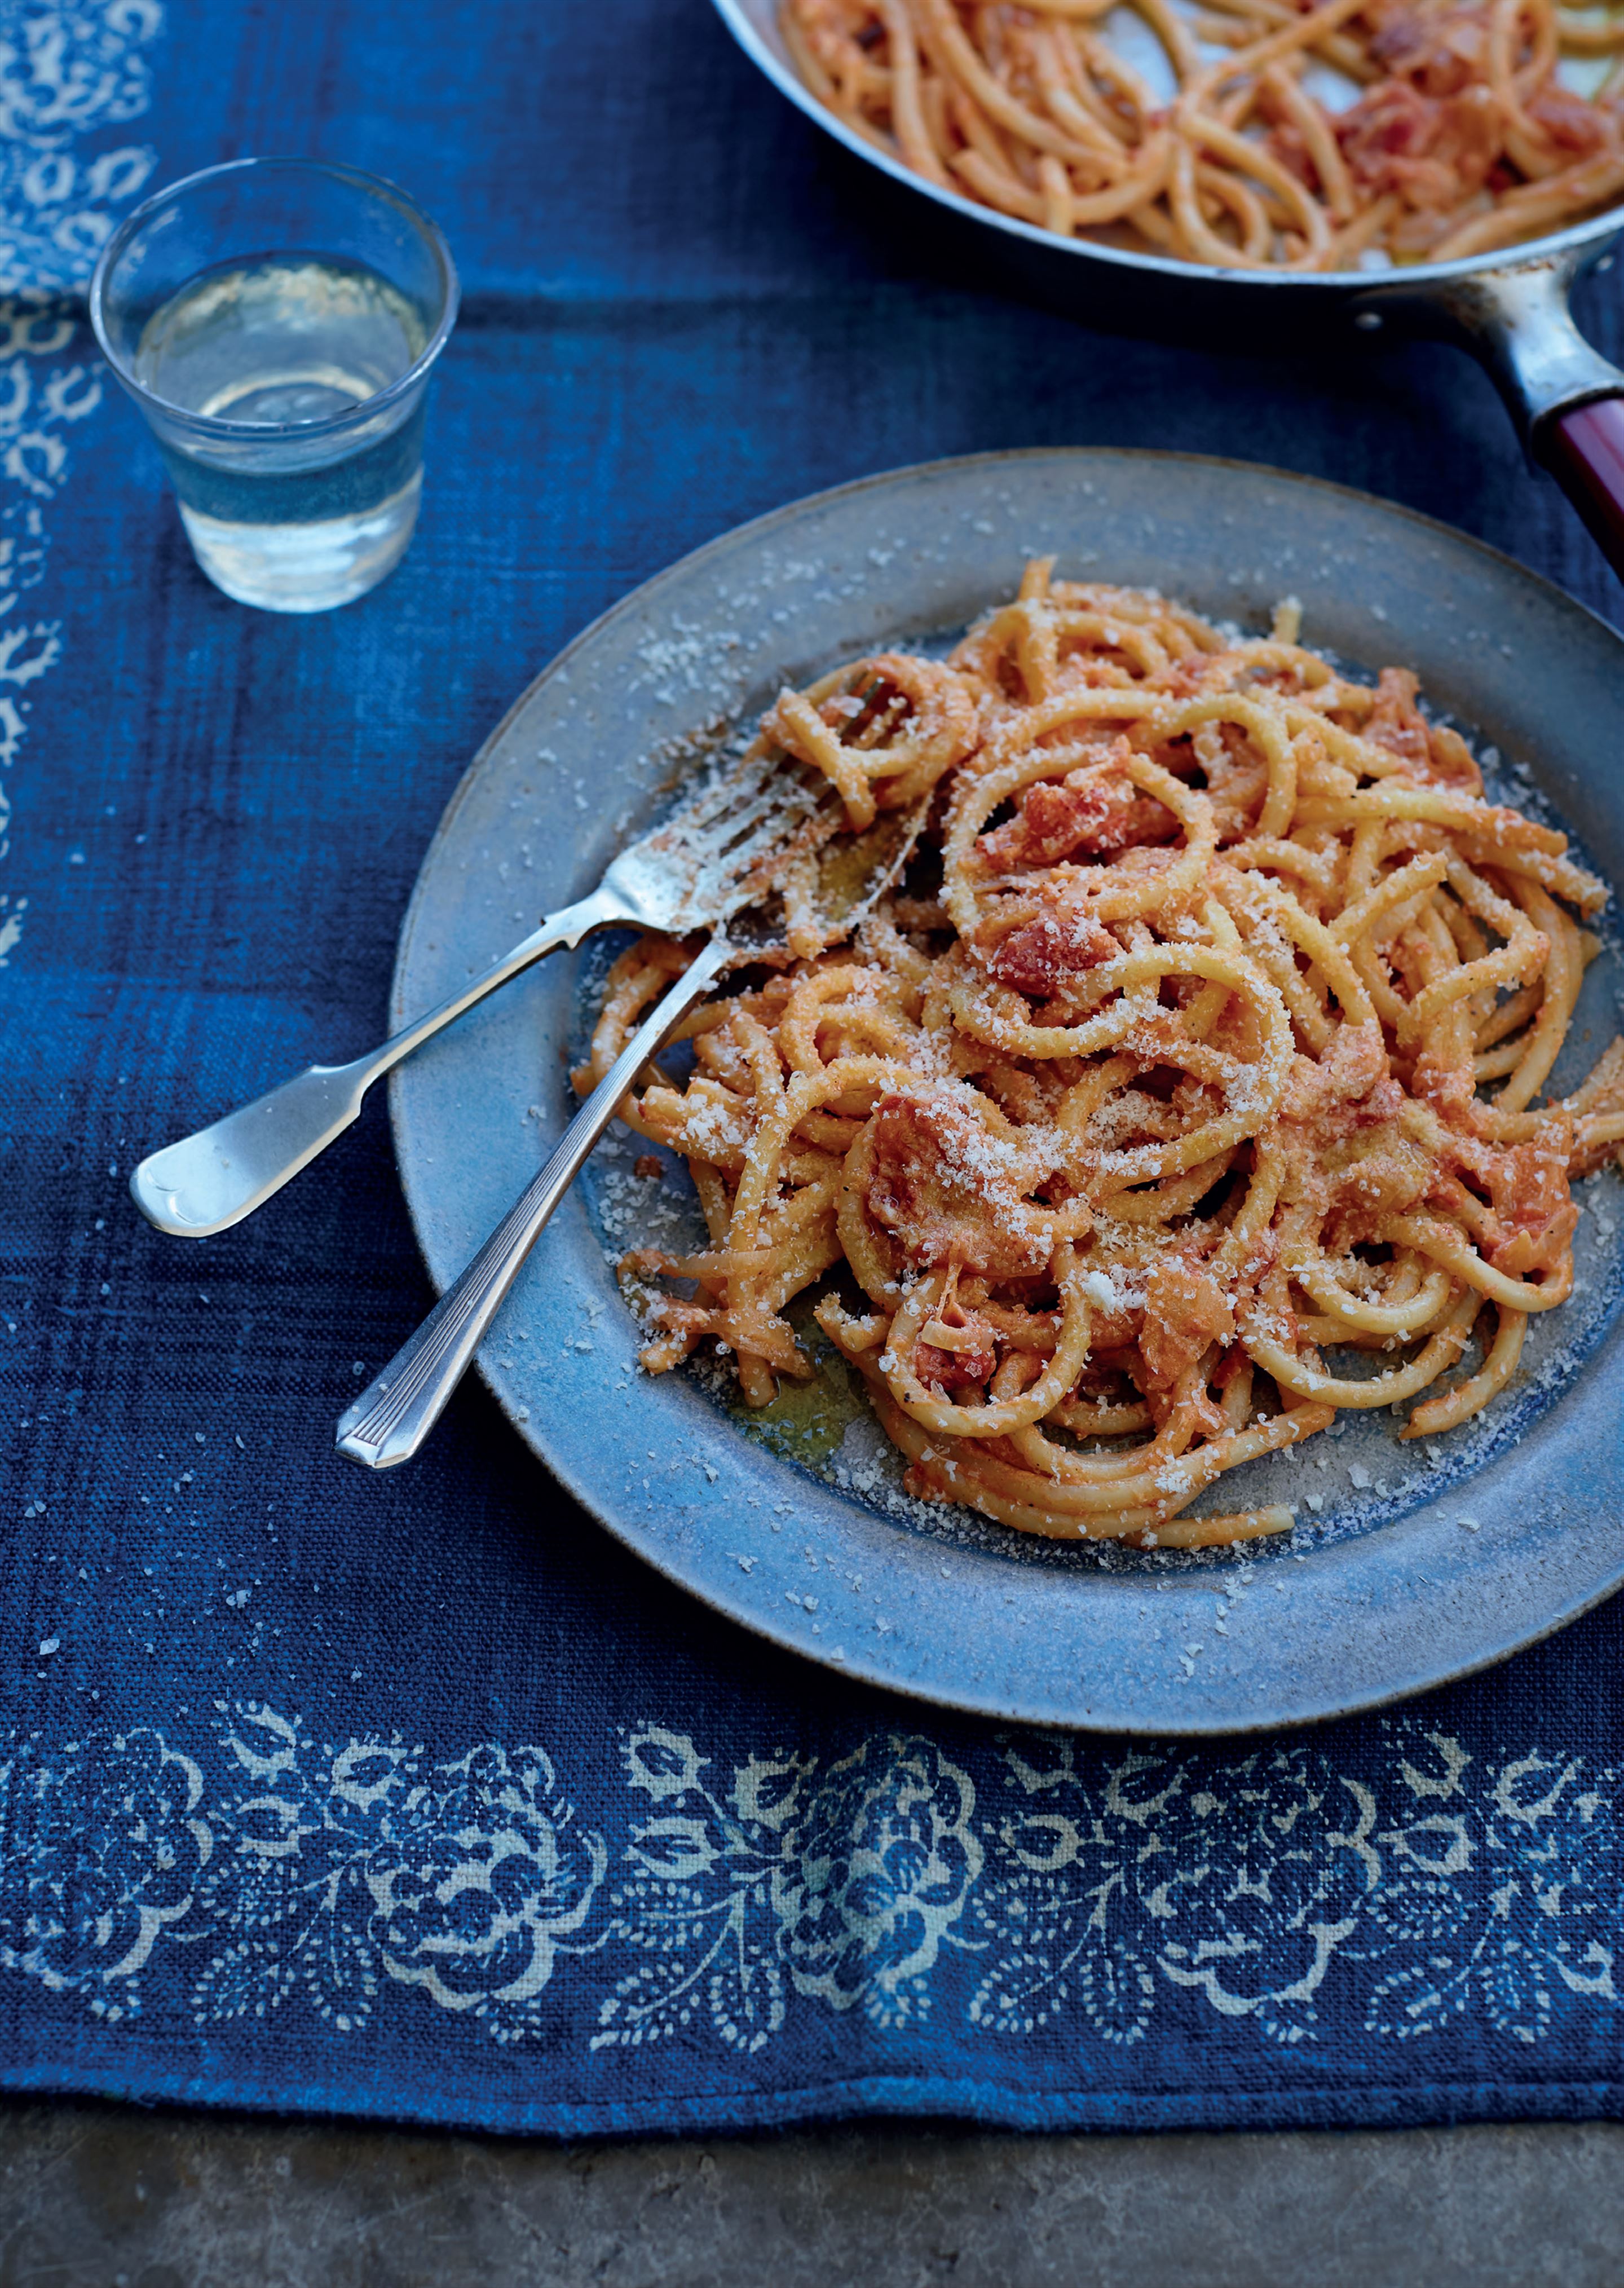 Pasta with onion and tomato sauce